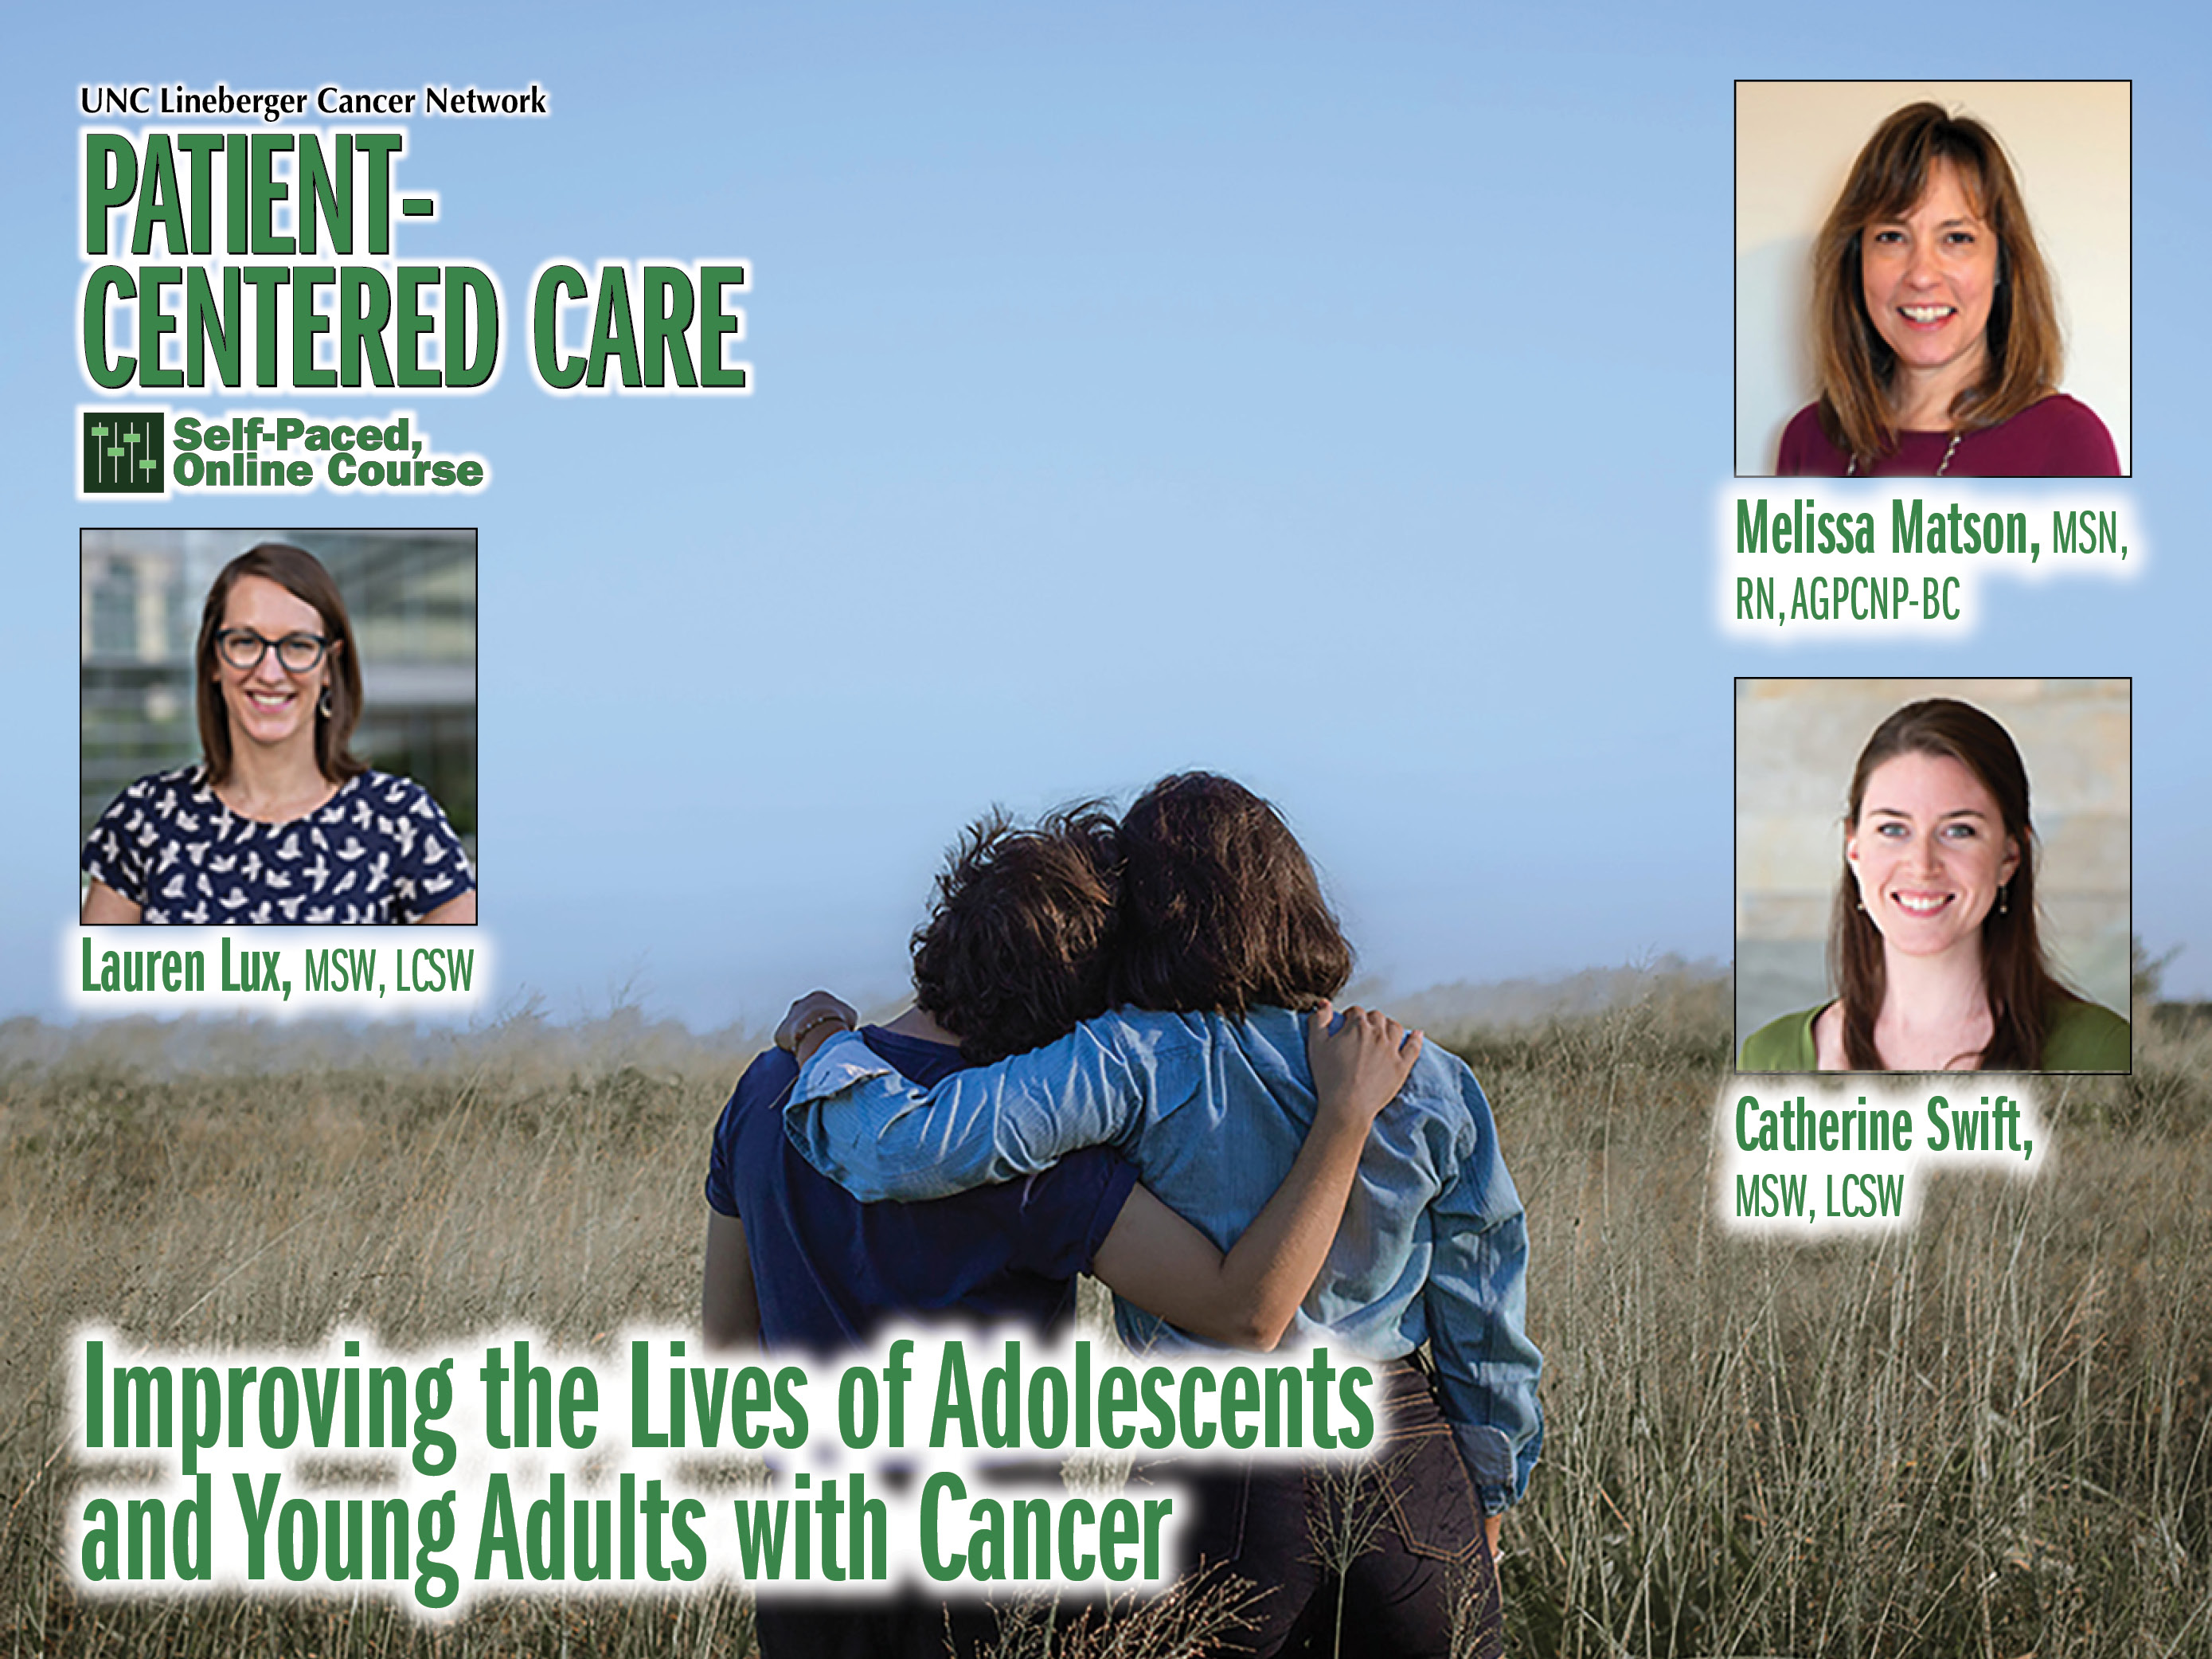 Improving the Lives of Adolescents and Young Adults with Cancer